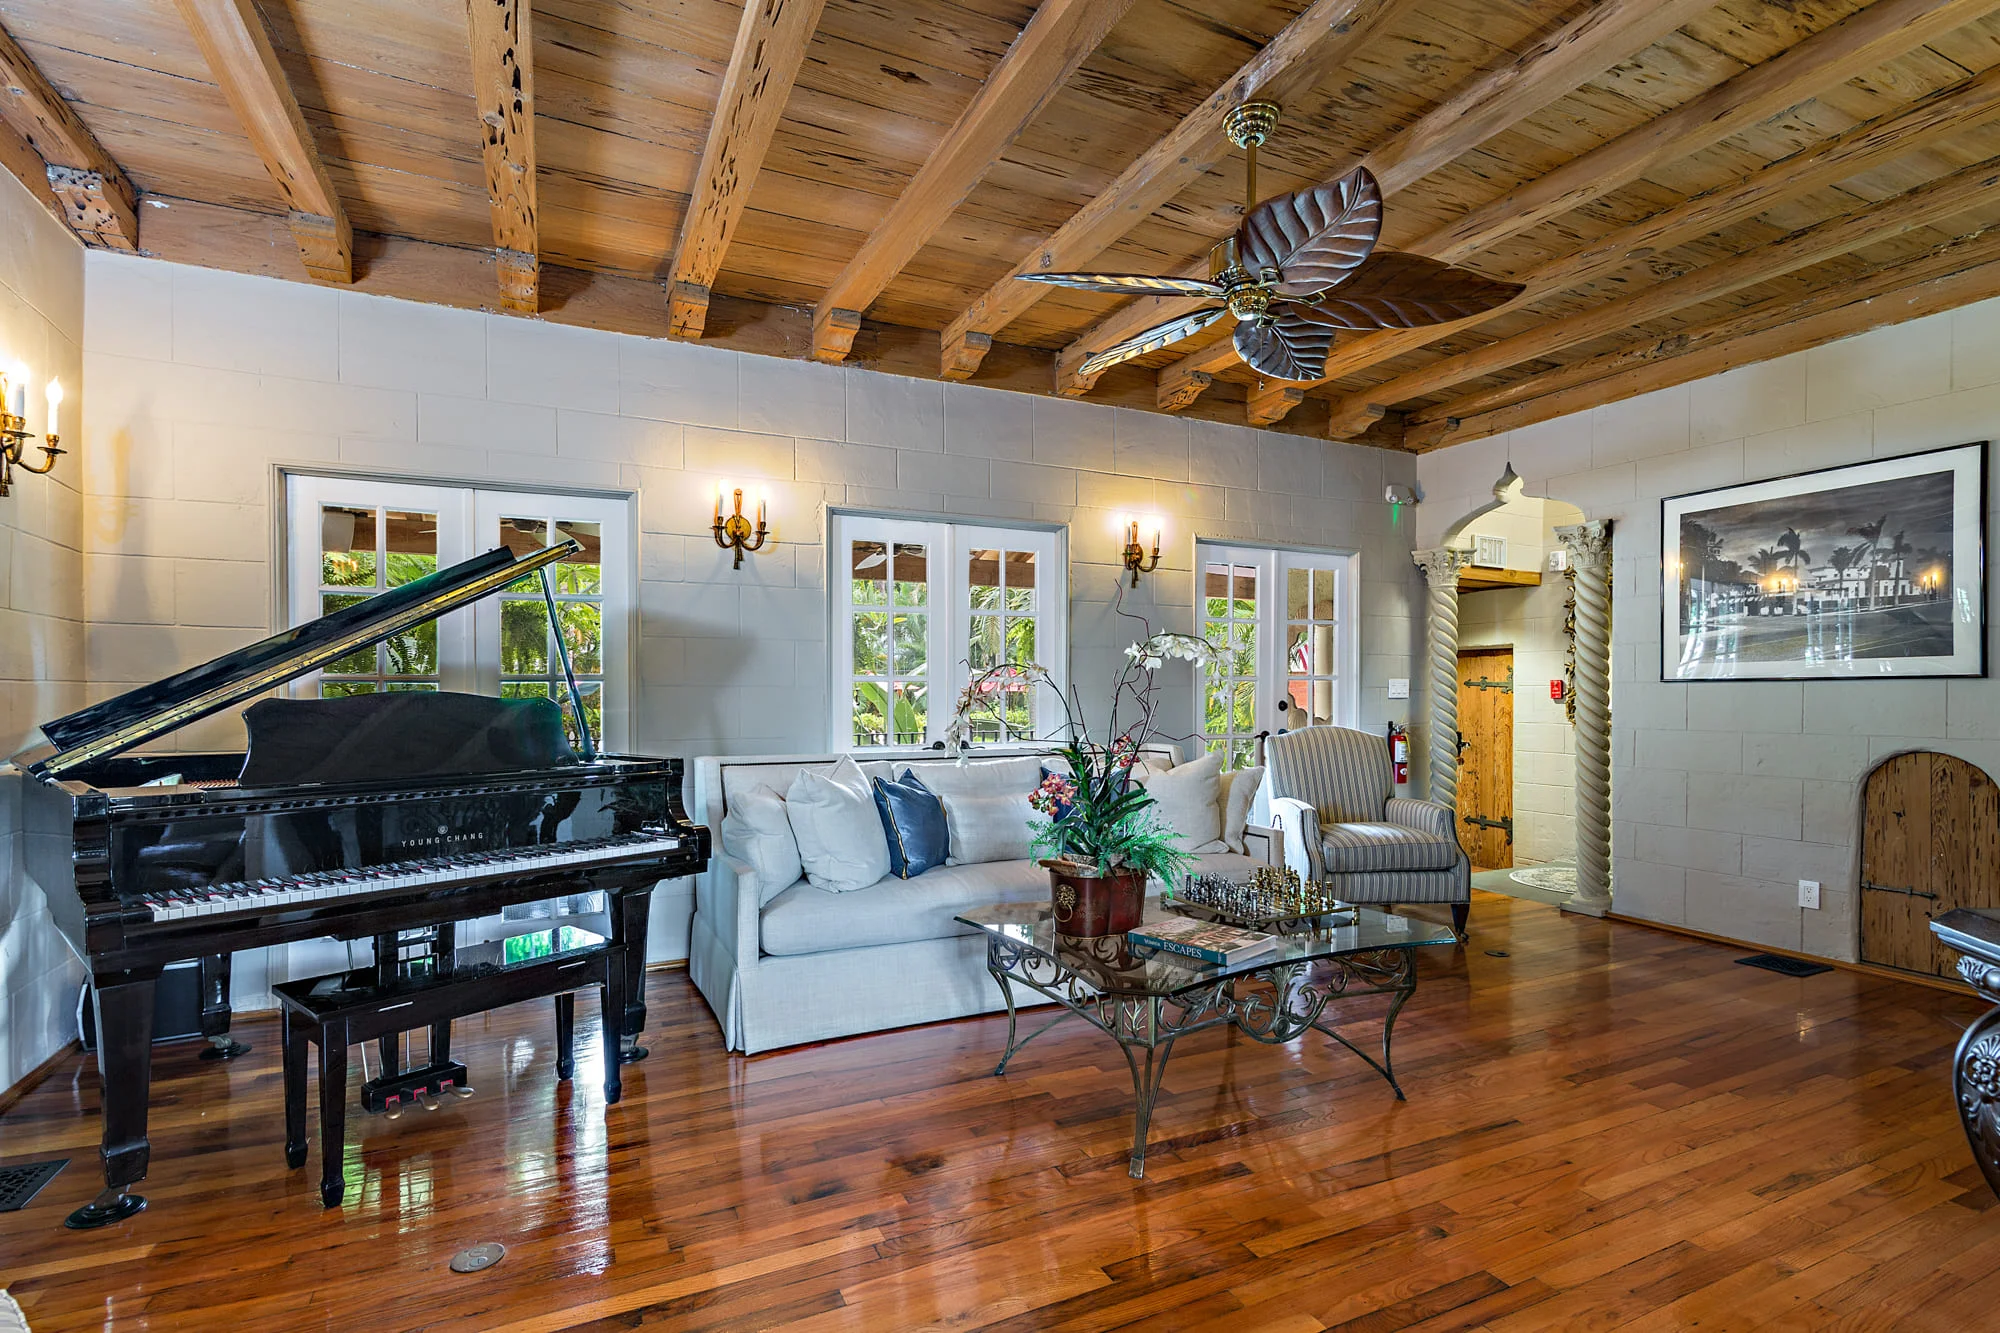 Image of baby grand piano Casa Grandview Bed and Breakfast this area is shared by Penthouse, Mezzanine, and Library